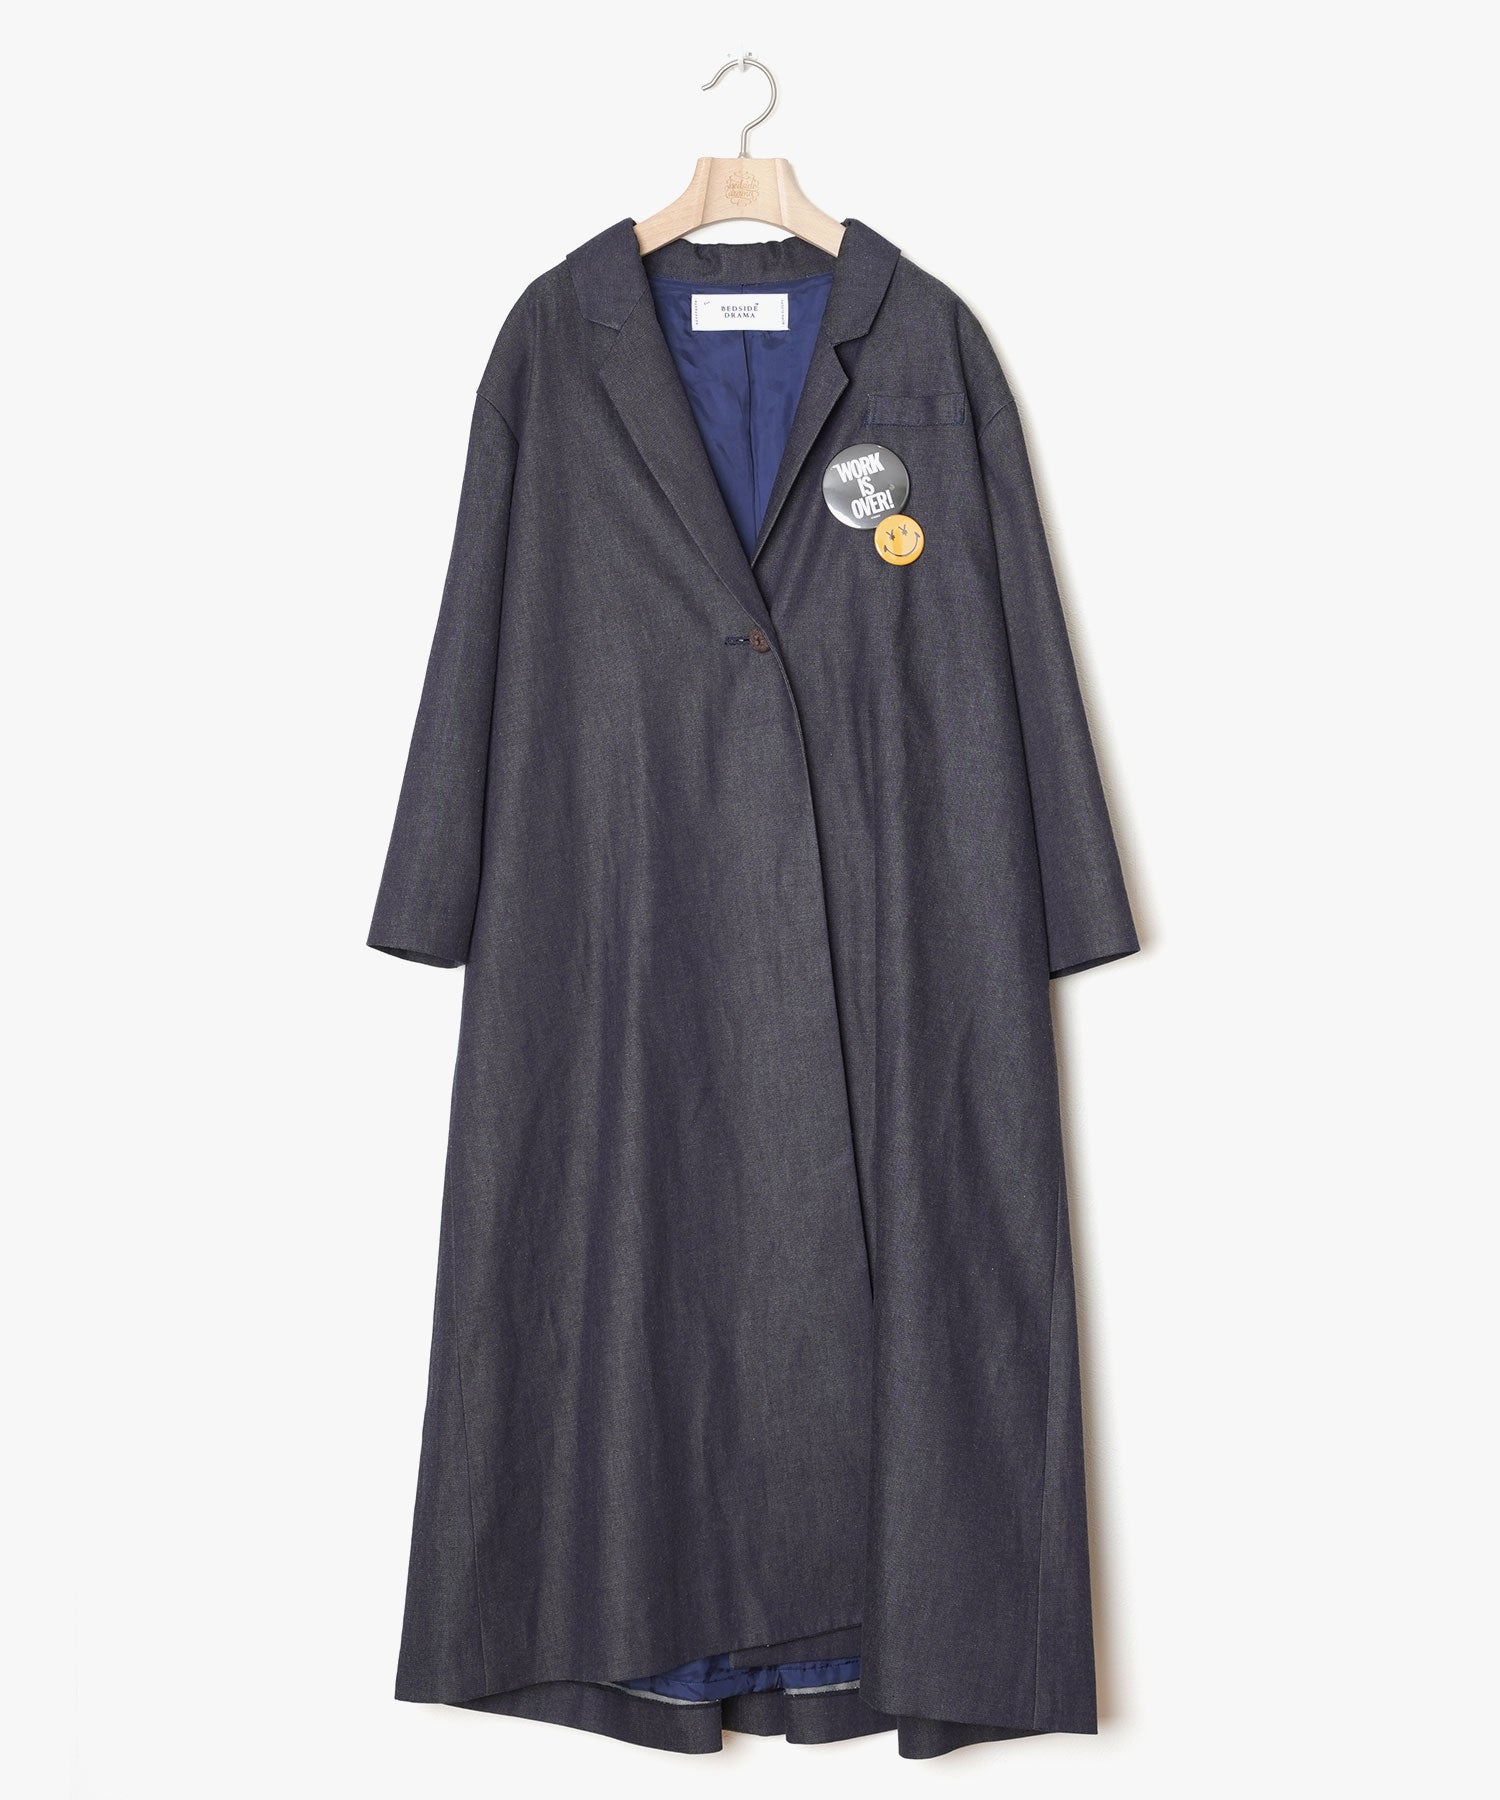 ☆reserve☆BEDSIDEDRAMA / Bedside Drama DENIM TRENCH COAT (Indigo) (Woman) Time delivery date August